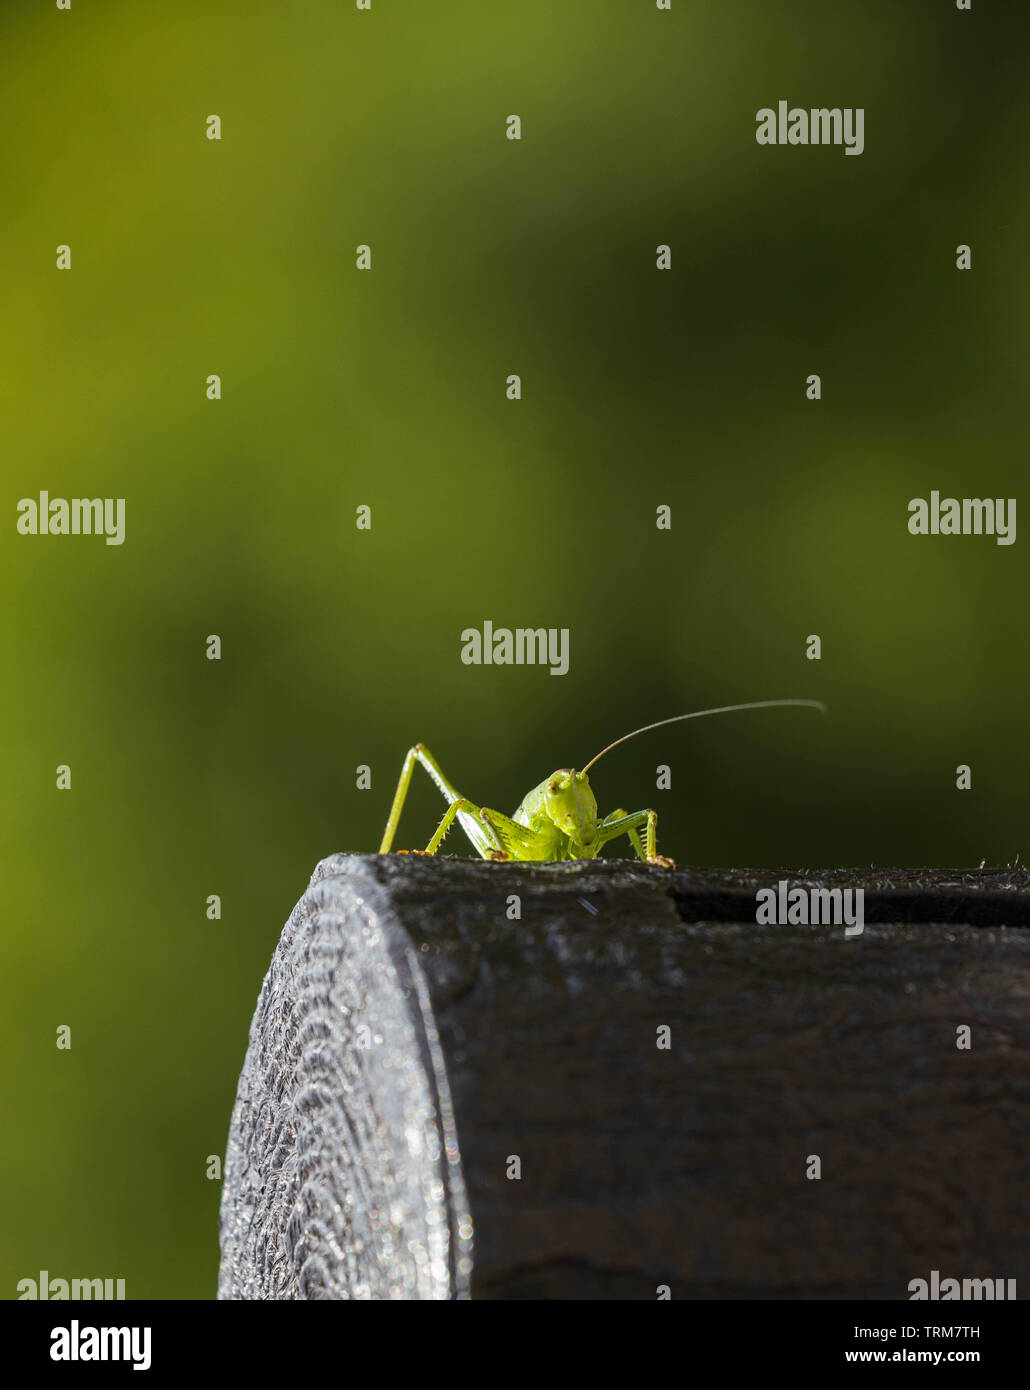 Green grasshopper climbs over rounded post against blurred green background Stock Photo